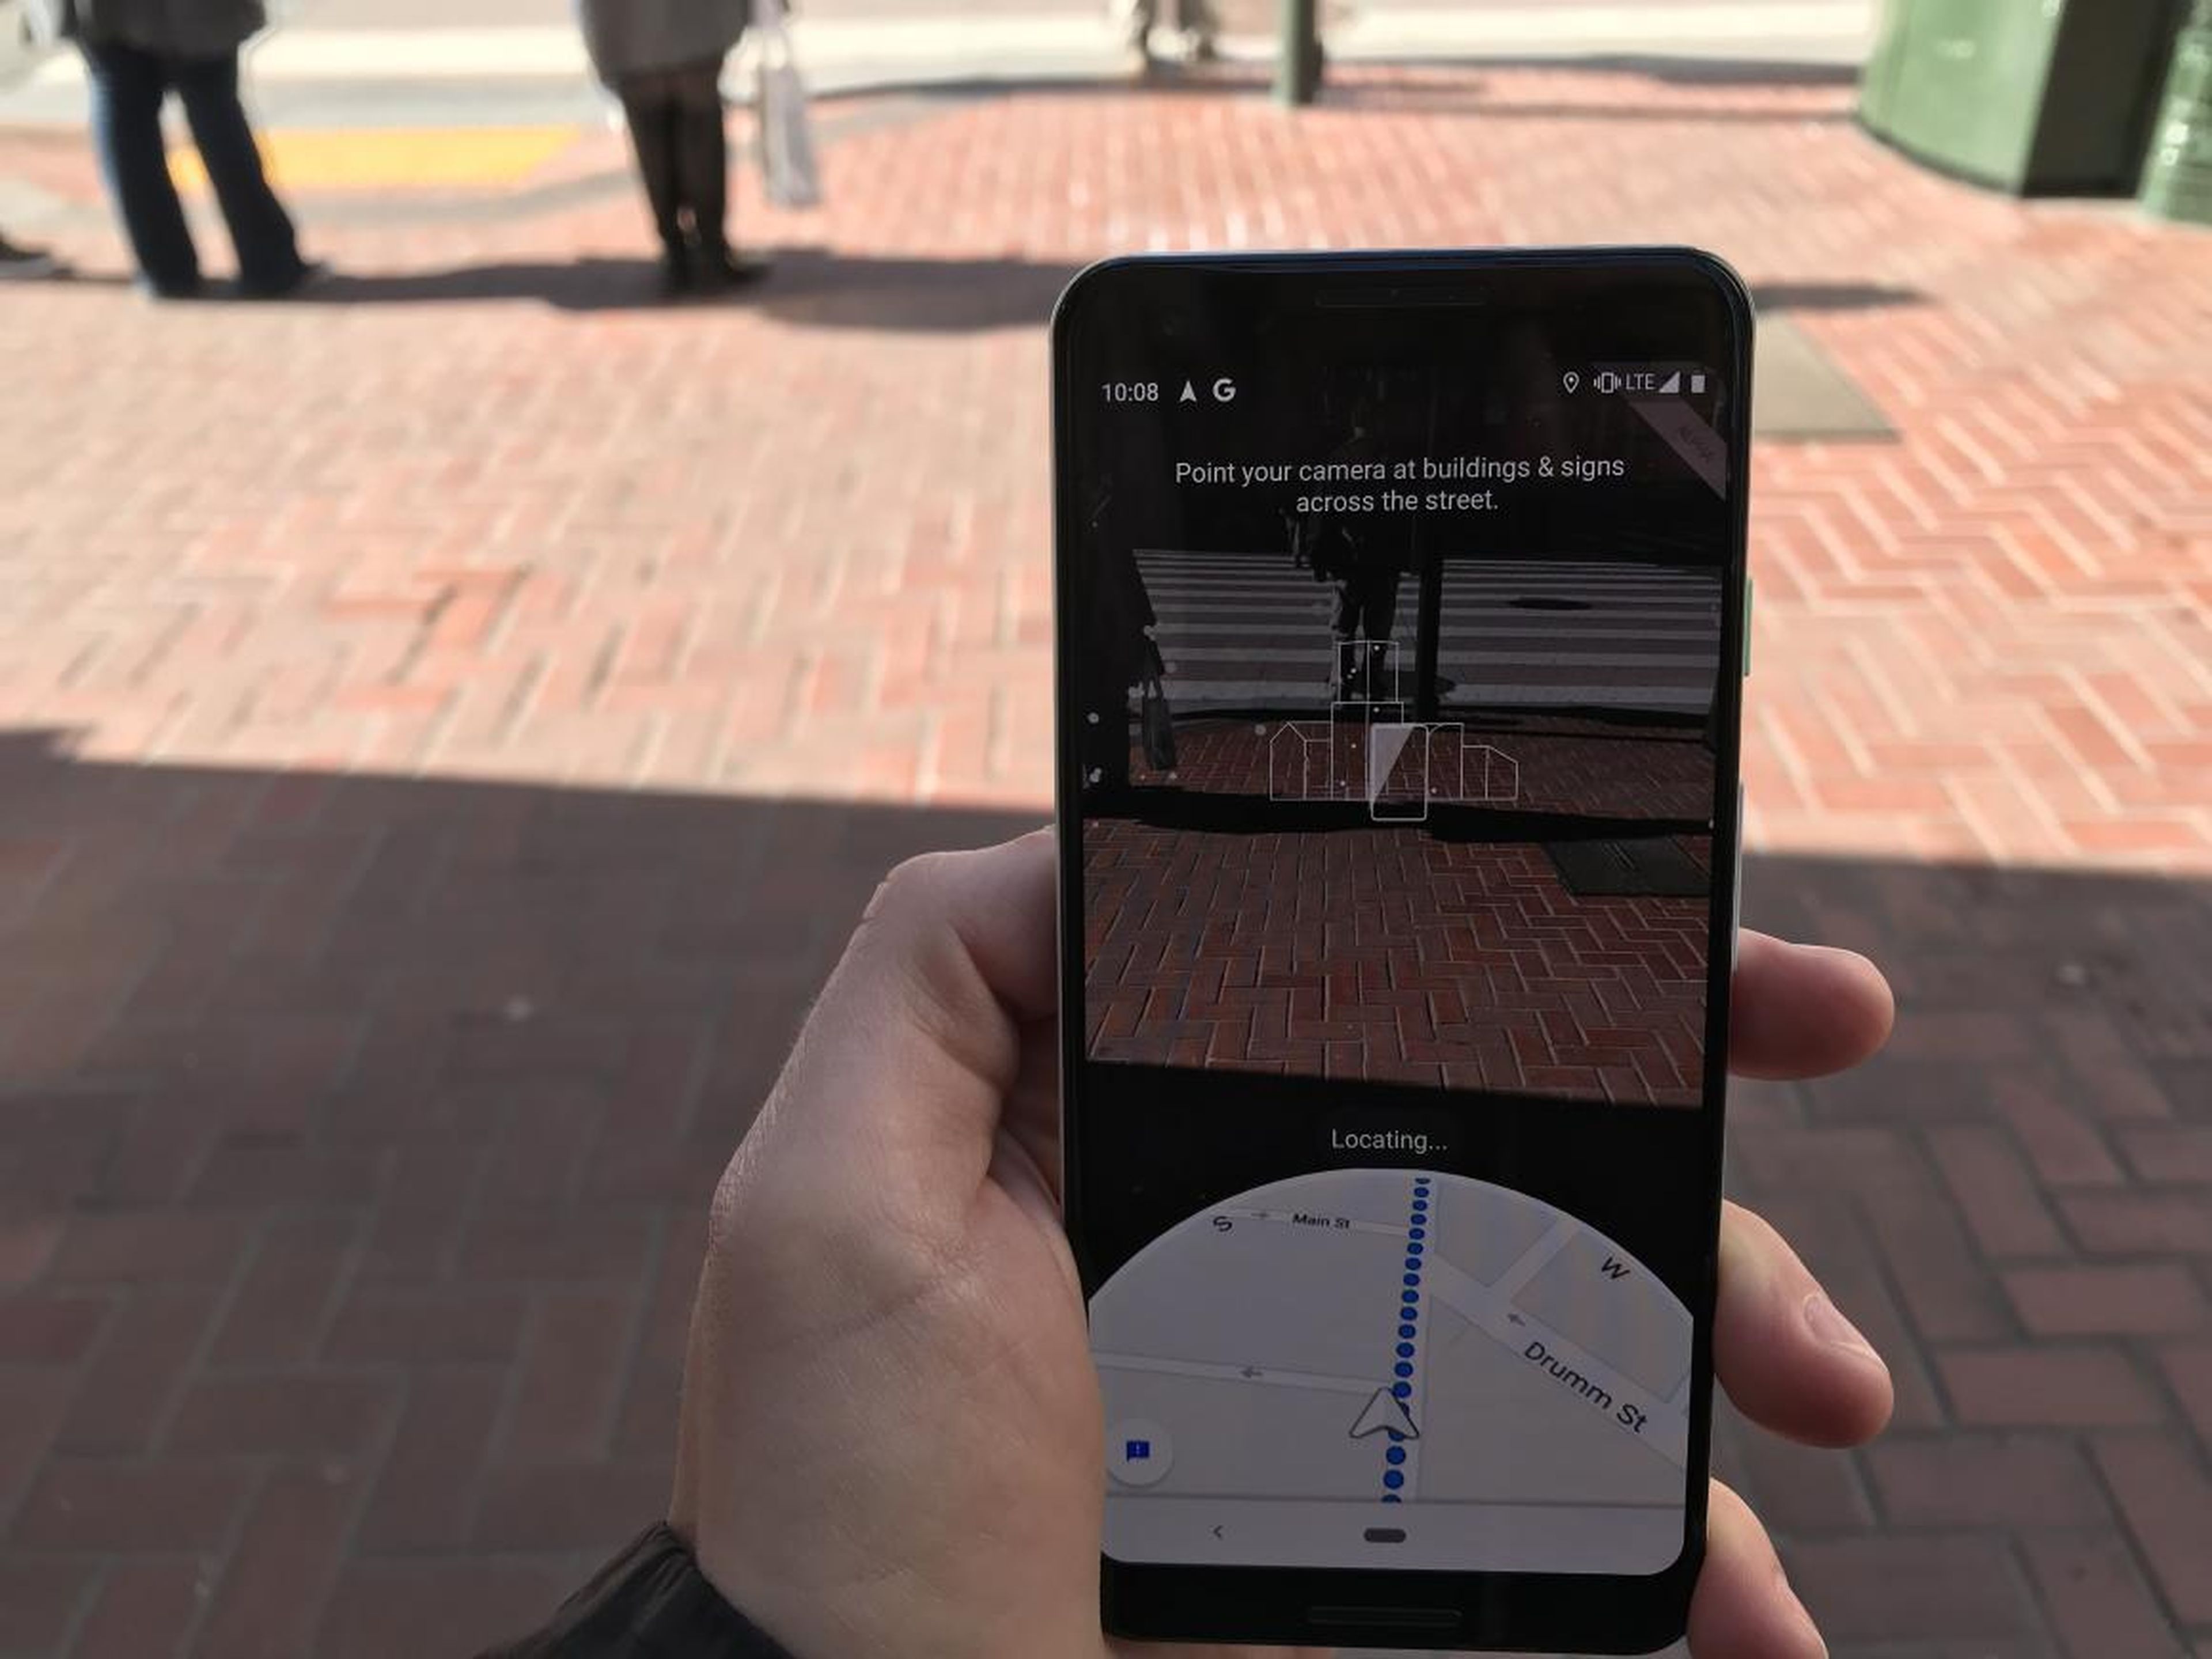 When you need to decide where to turn next, you can tilt the phone upwards. Google Maps then tries to understand your location based on the imagery around you.